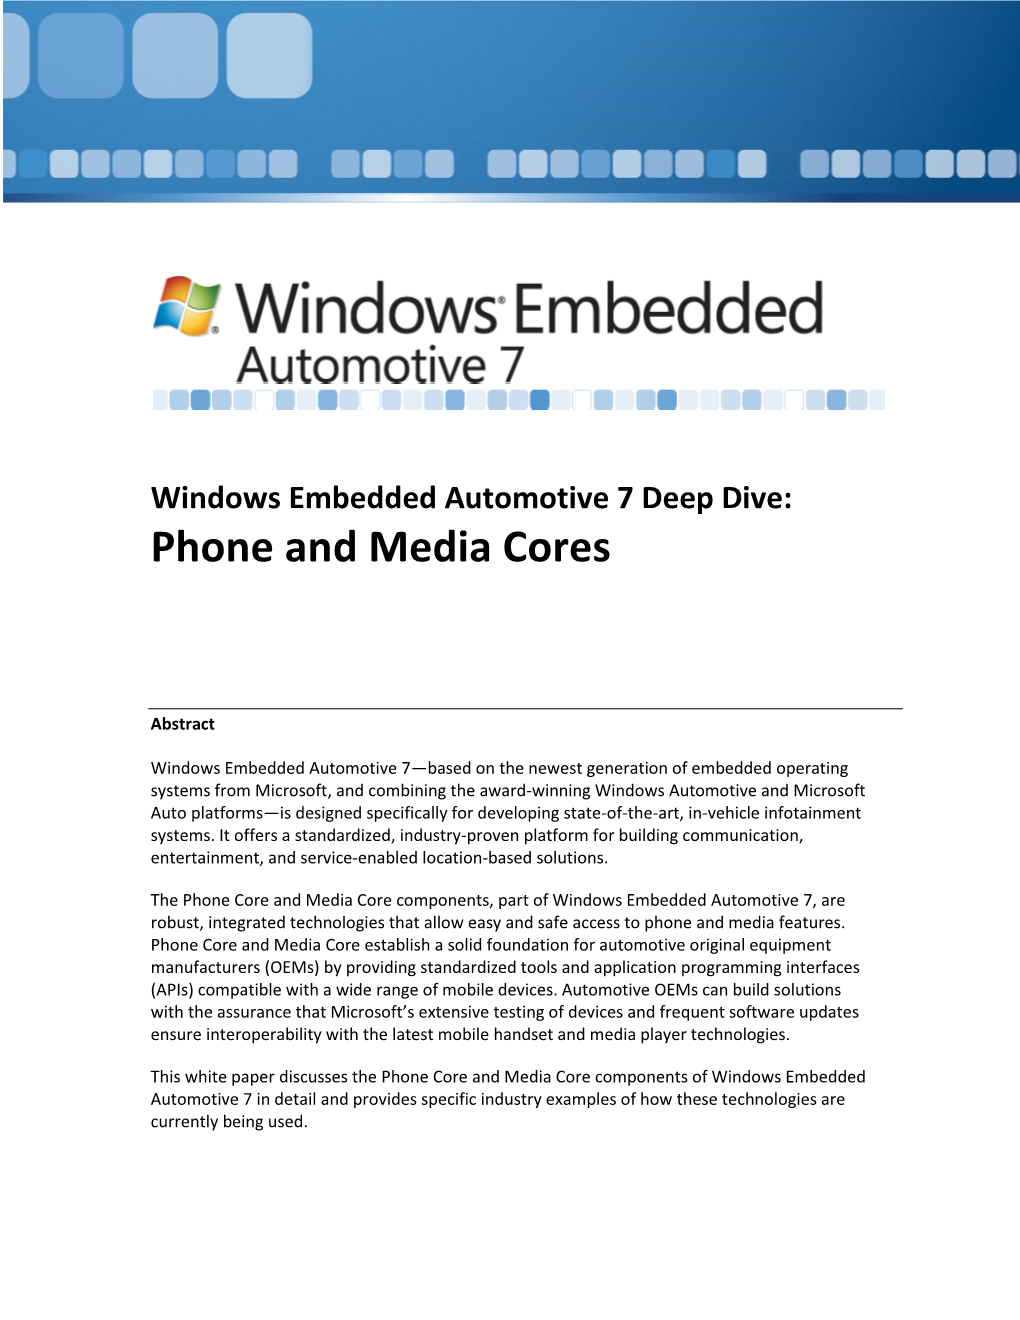 Windows Embedded Automotive Deep Dive: Phone and Media Cores